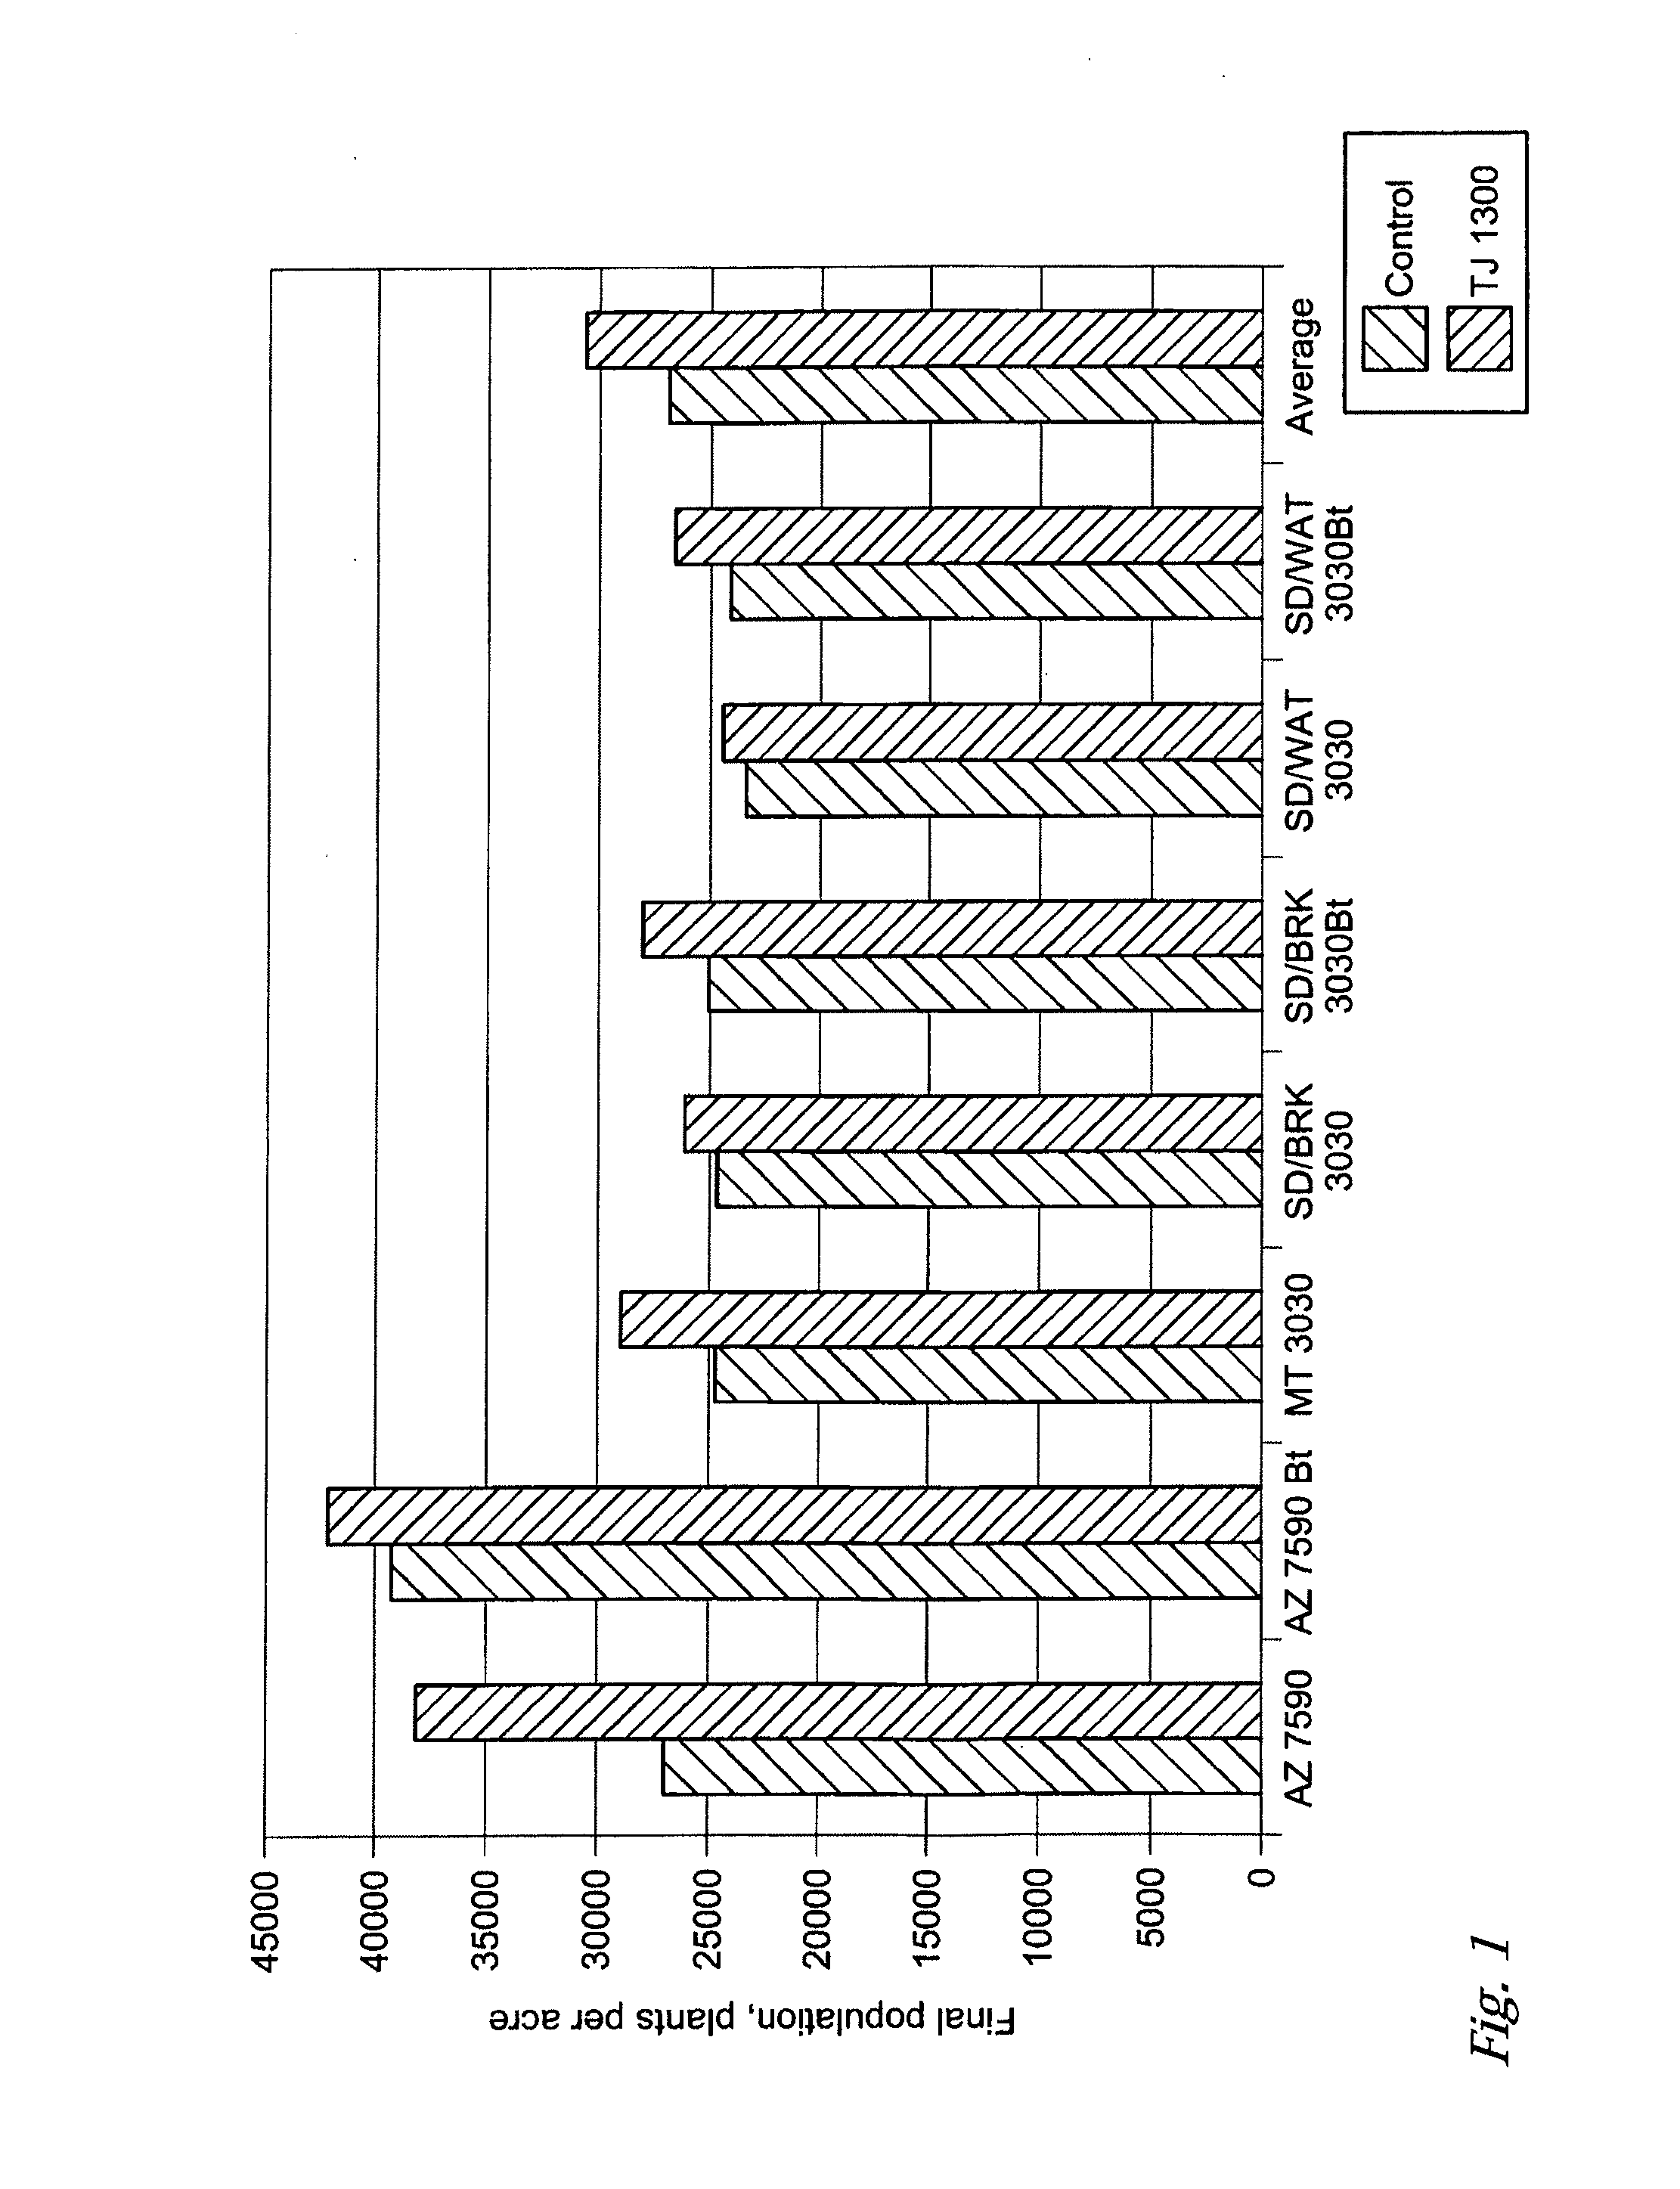 Plant seed assemblies comprising fungal/bacterial antagonists